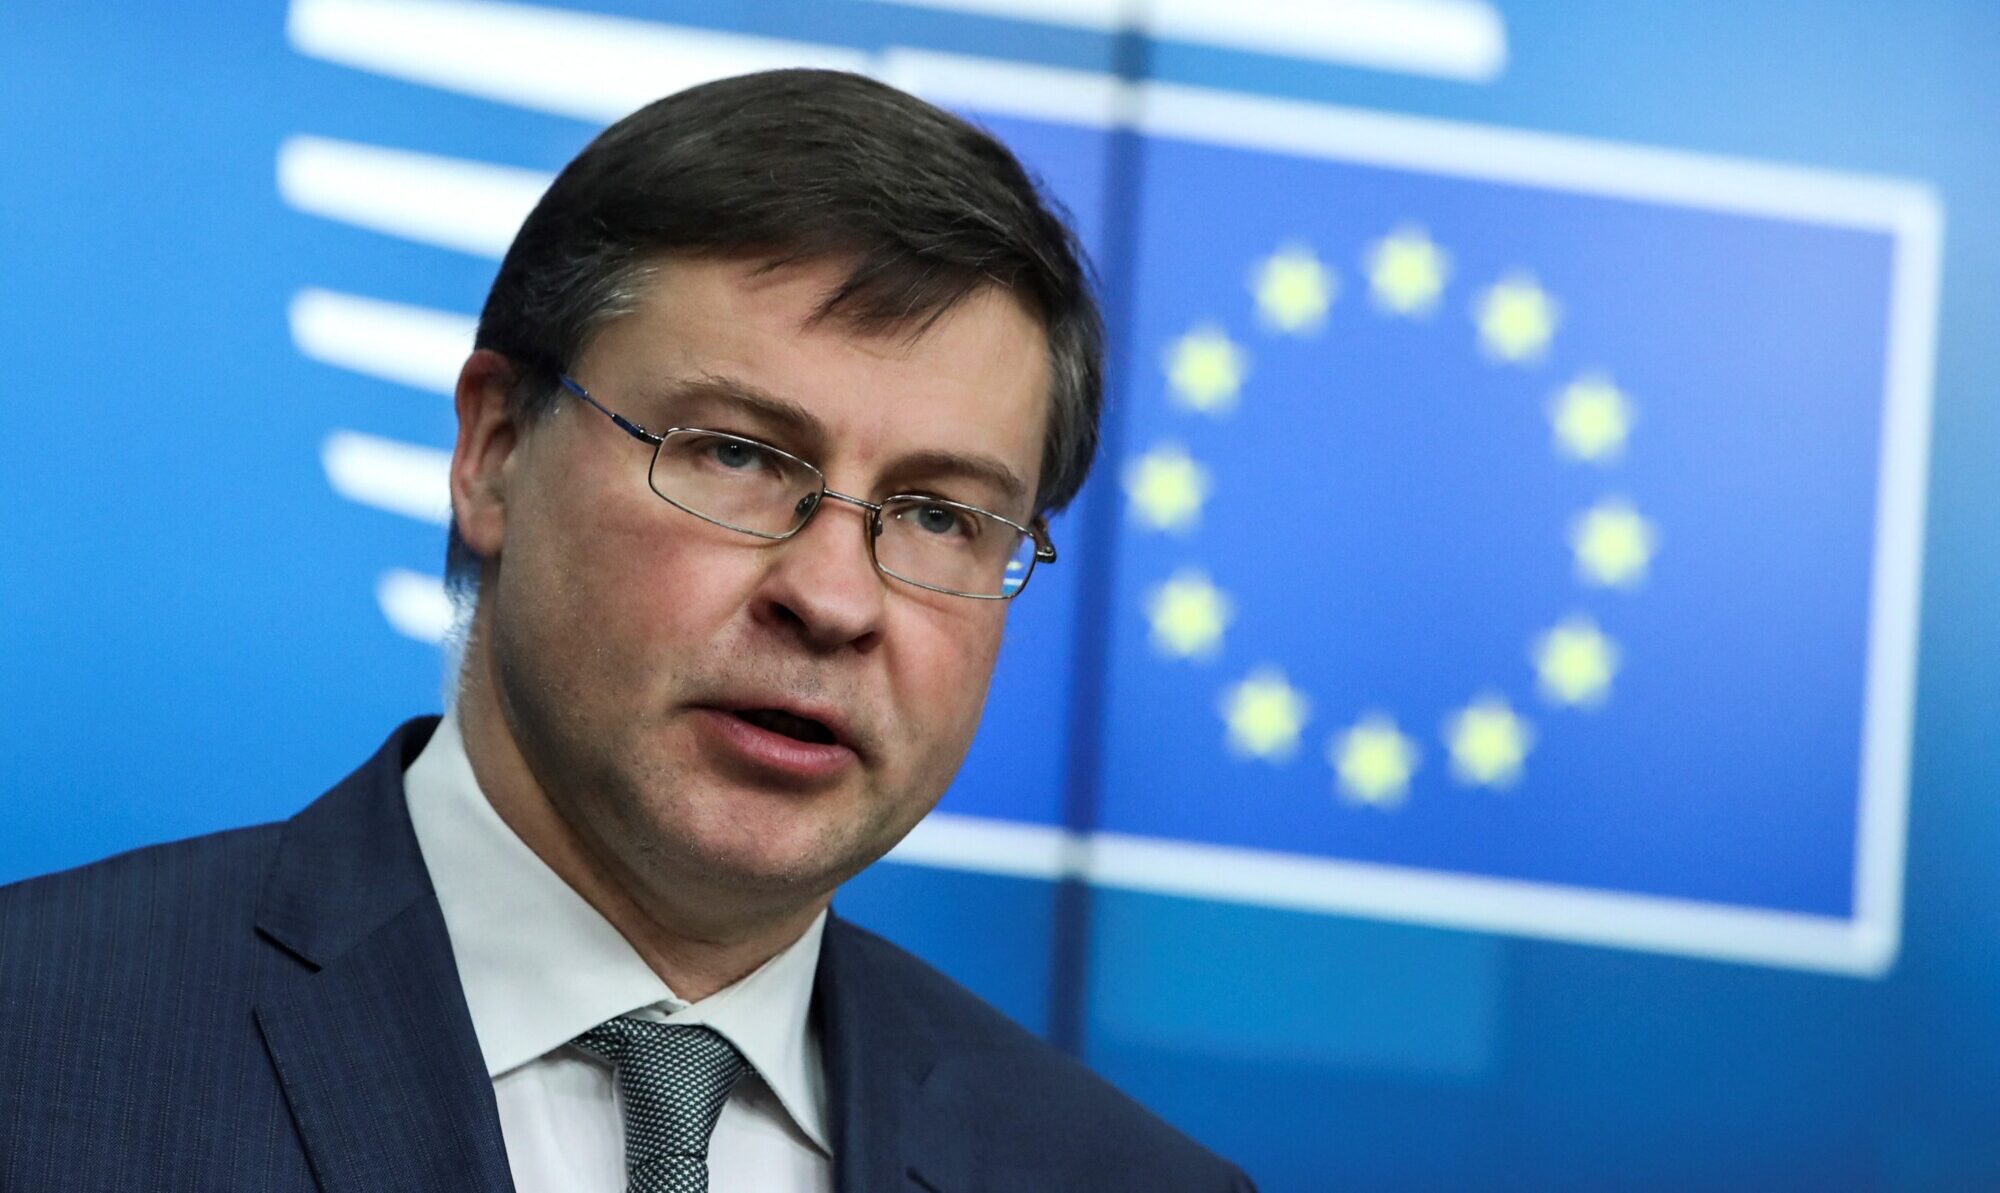 EU Trade Chief: Efforts to Ratify China Deal ‘Suspended’